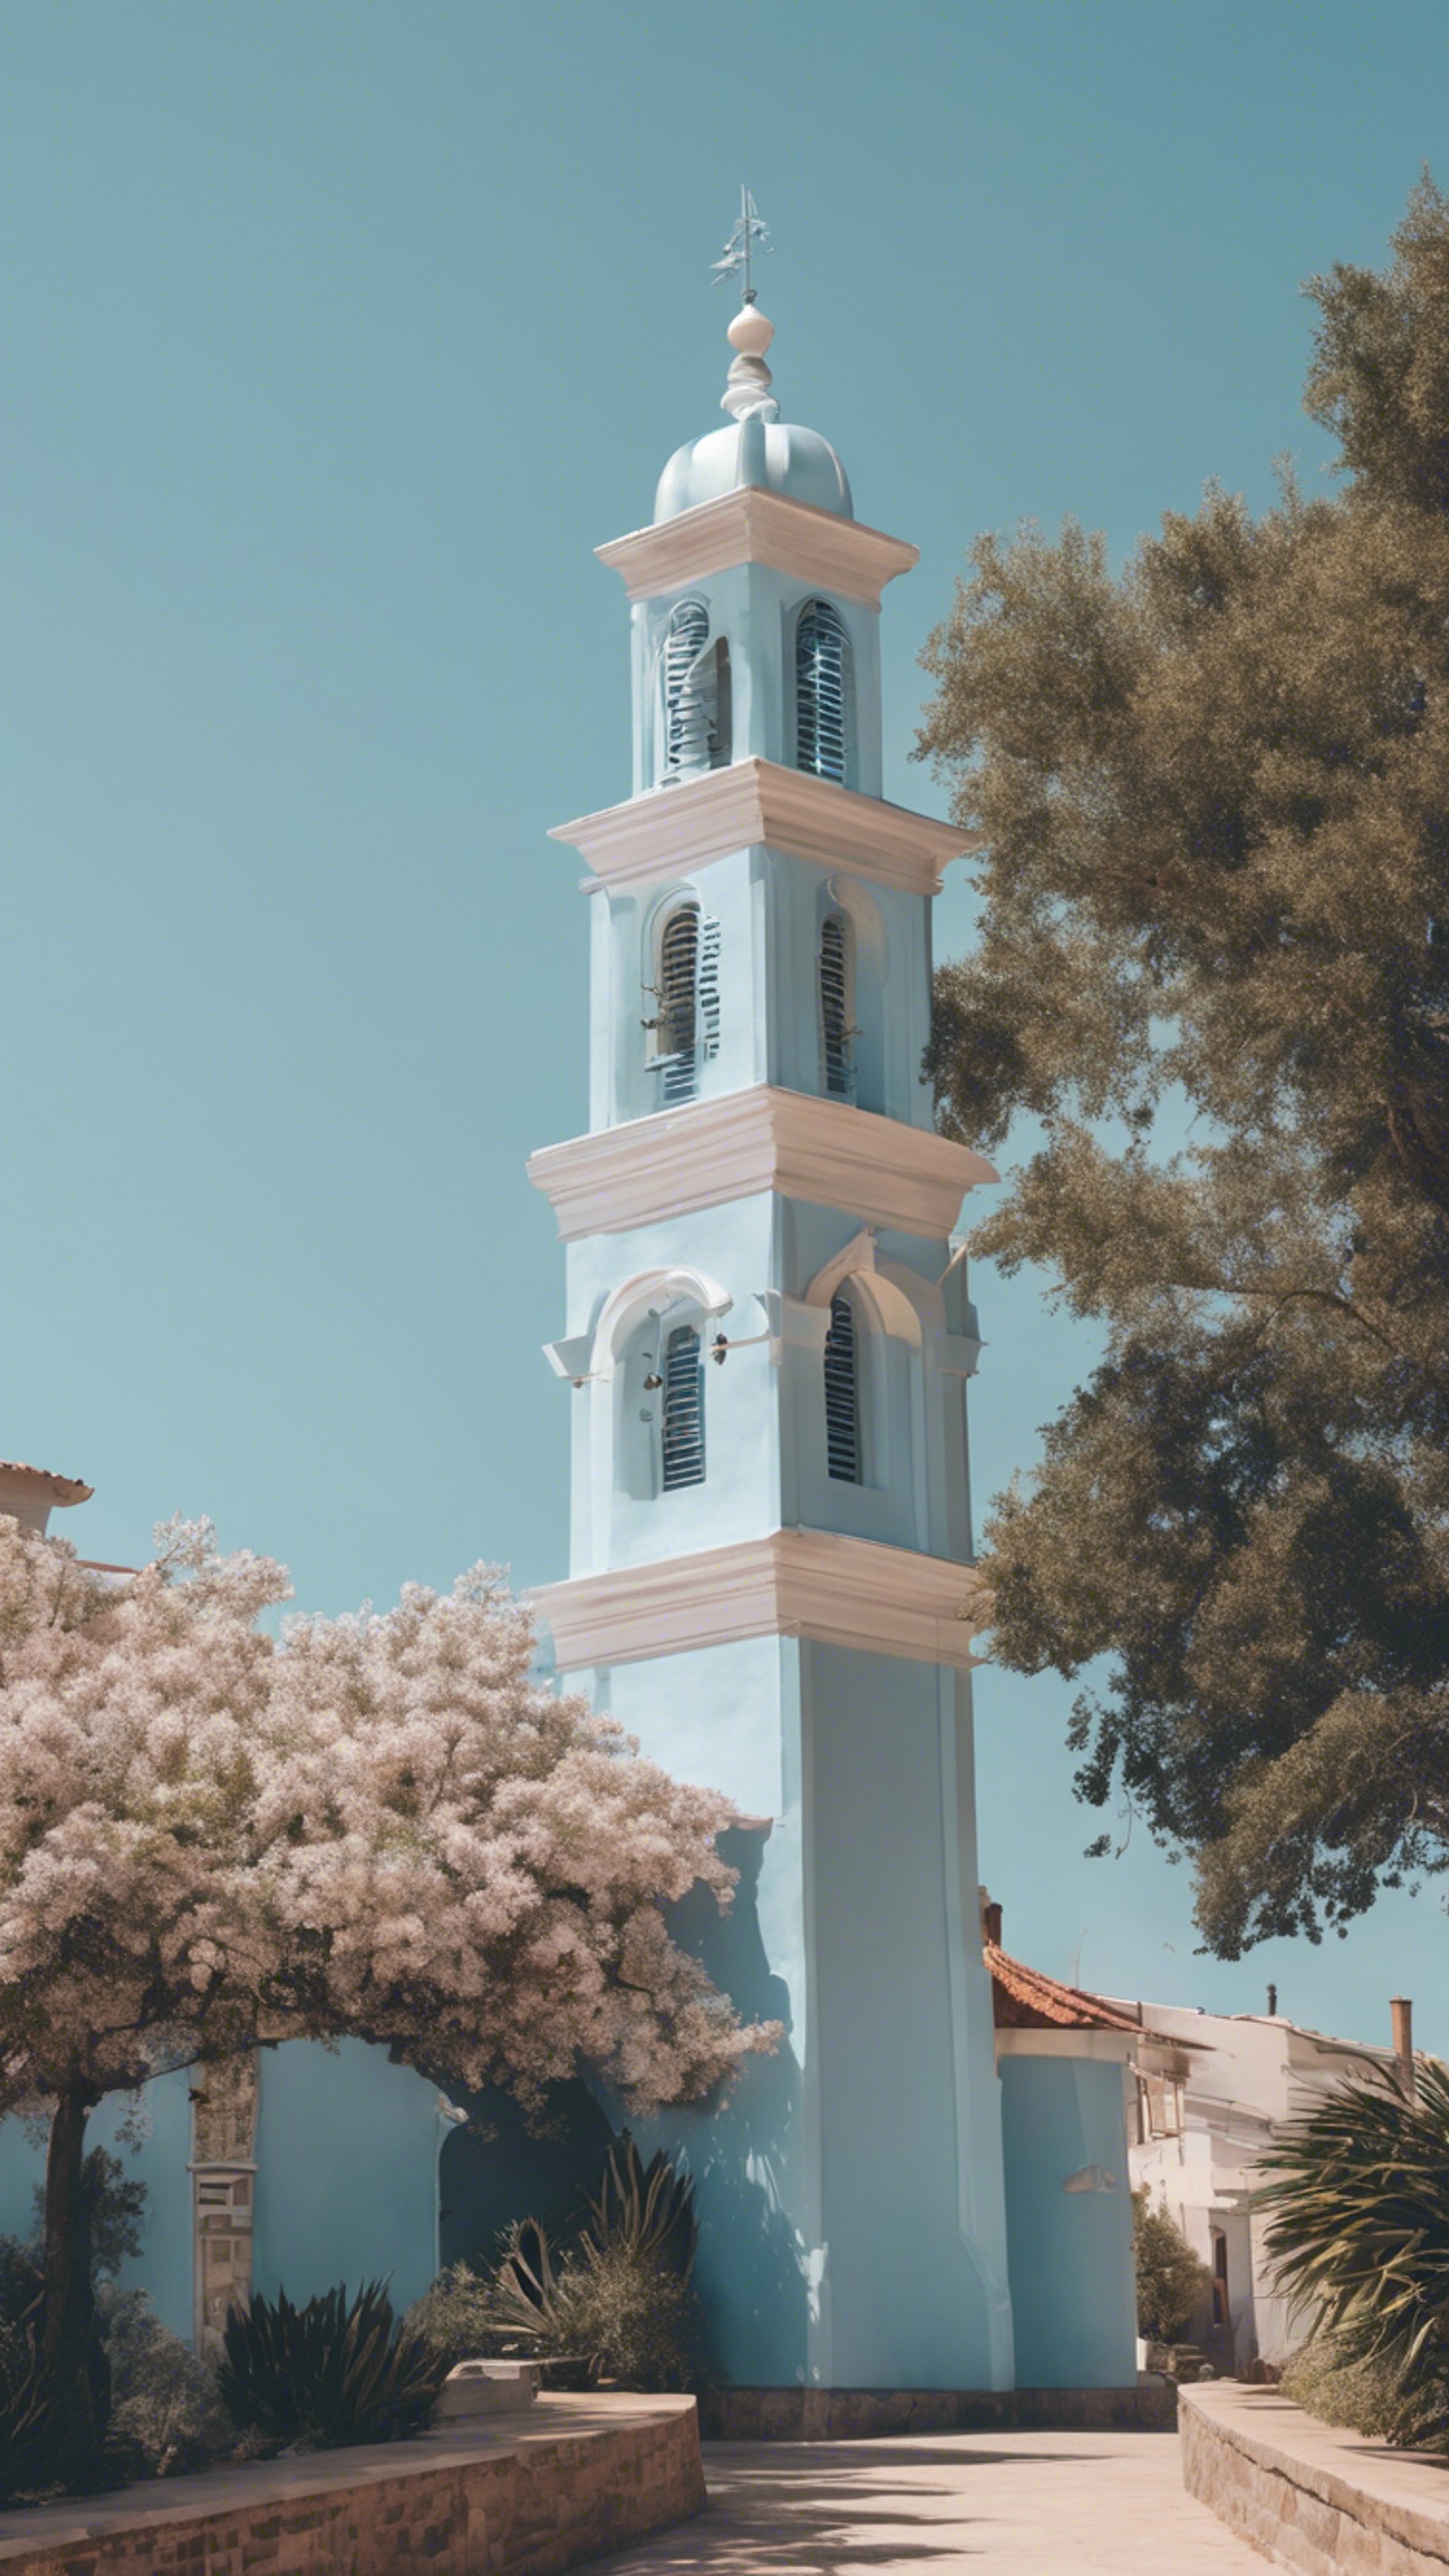 A stately pastel blue bell tower against a clear, sunny sky in a coastal town. Tapeta na zeď[a05c52dcc3054b35b6be]